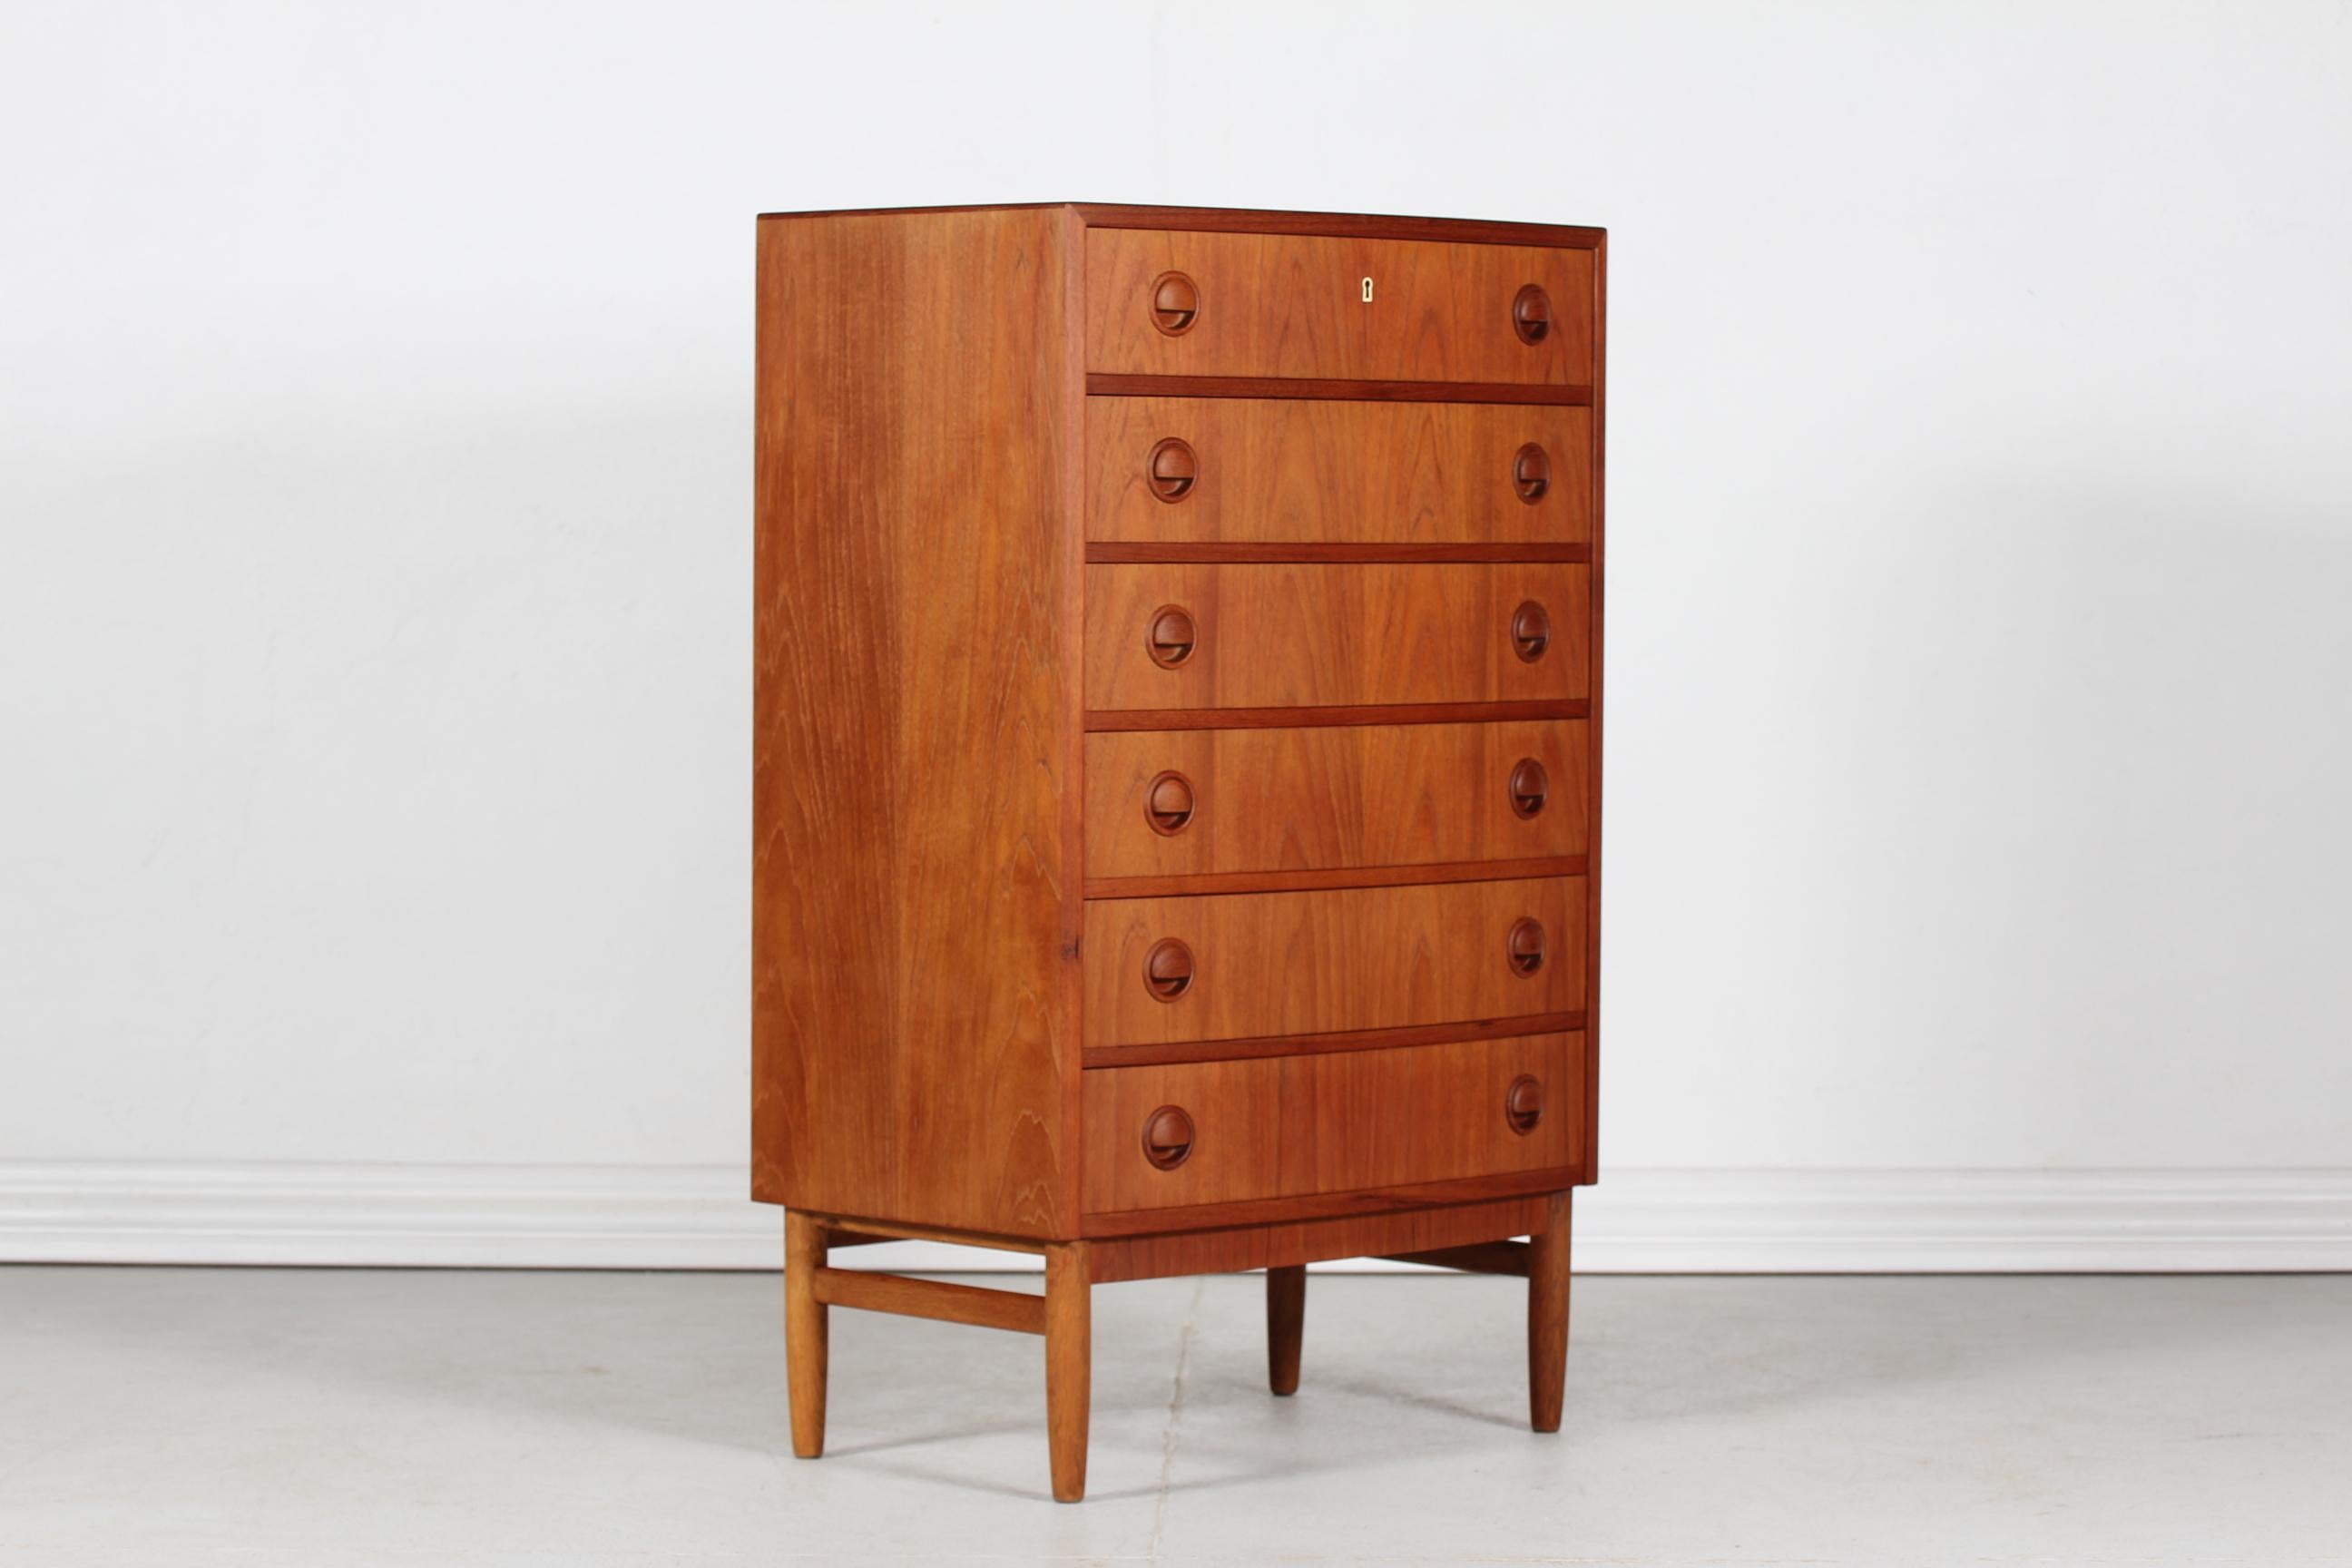 Tall chest of drawers with 6 drawers by Danish furniture architect and designer Kai Kristiansen. Manufactured by Feldballes Møbelfabrik in the 1960´s in Denmark.
This beautiful piece of furniture is made teak and the drawers have visible joints.